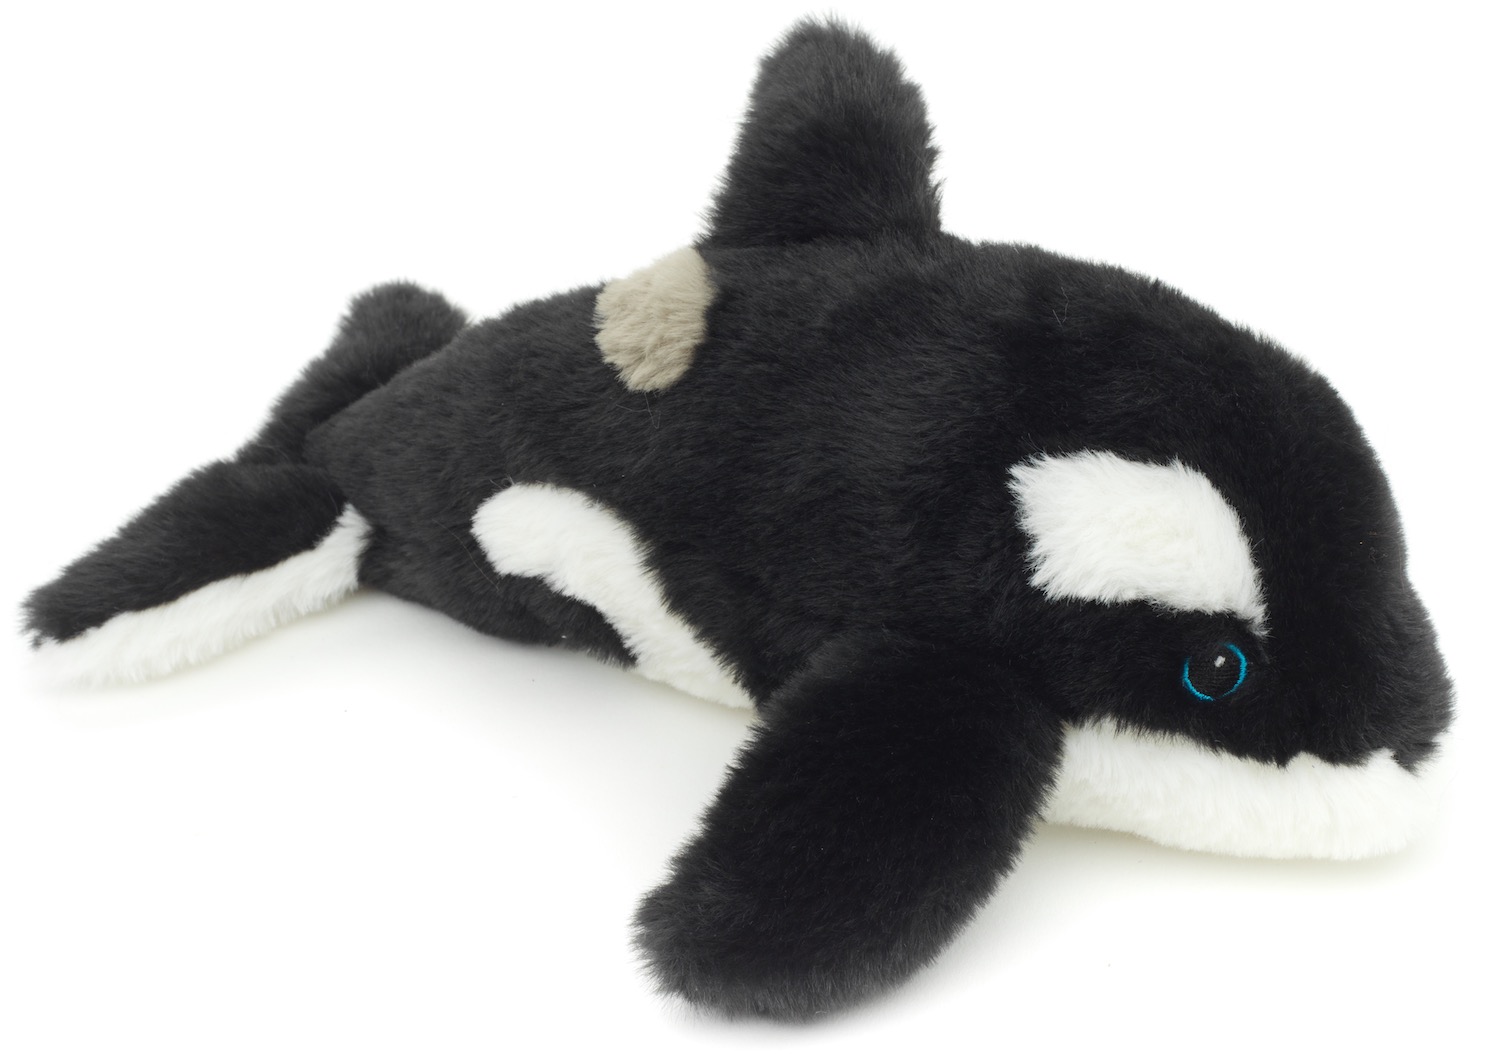 Eco-Line - Orca - 100% recycled material